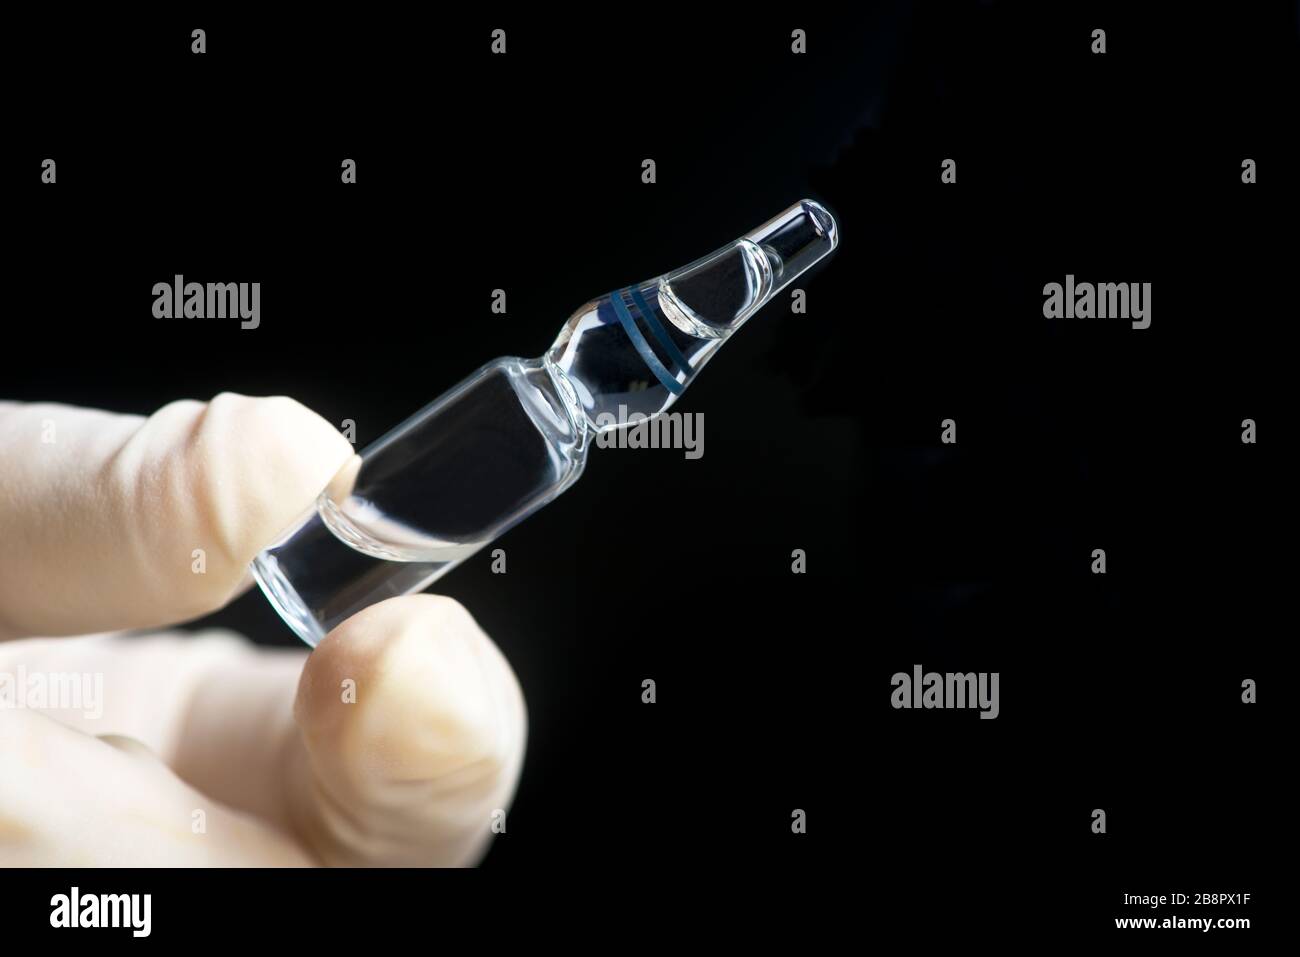 Glass ampule of medication held by gloved hand on black background. Stock Photo